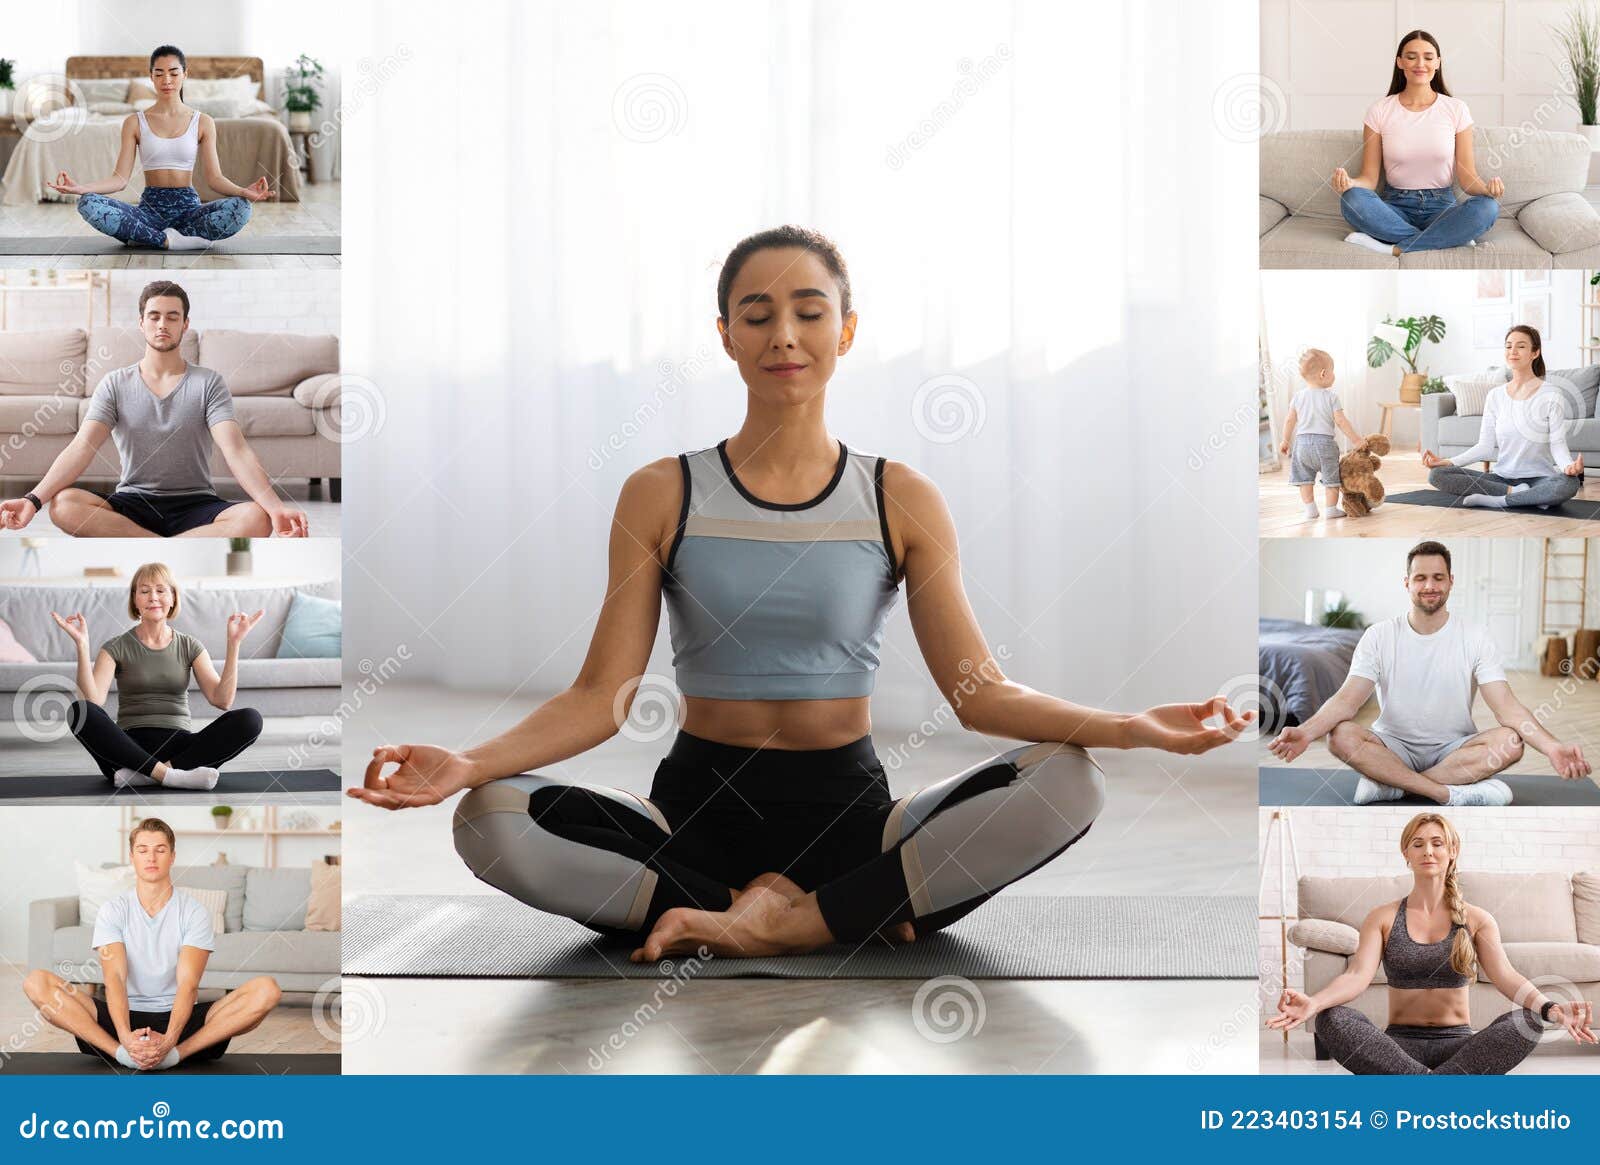 different people practicing yoga at home via web conference on computer, screenshot